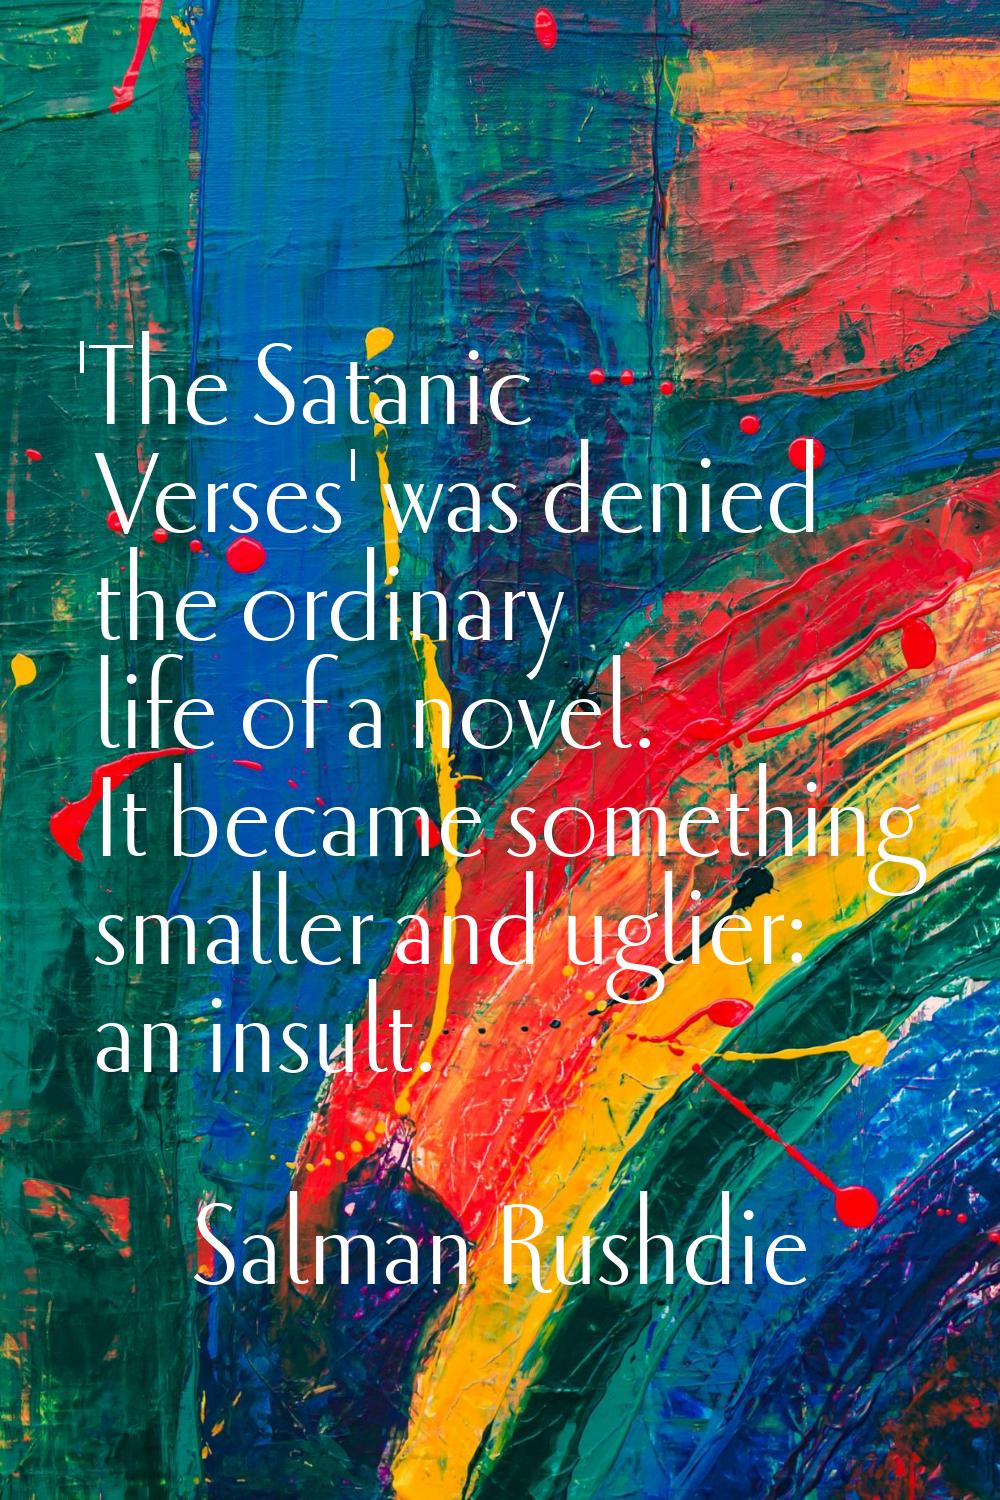 'The Satanic Verses' was denied the ordinary life of a novel. It became something smaller and uglie